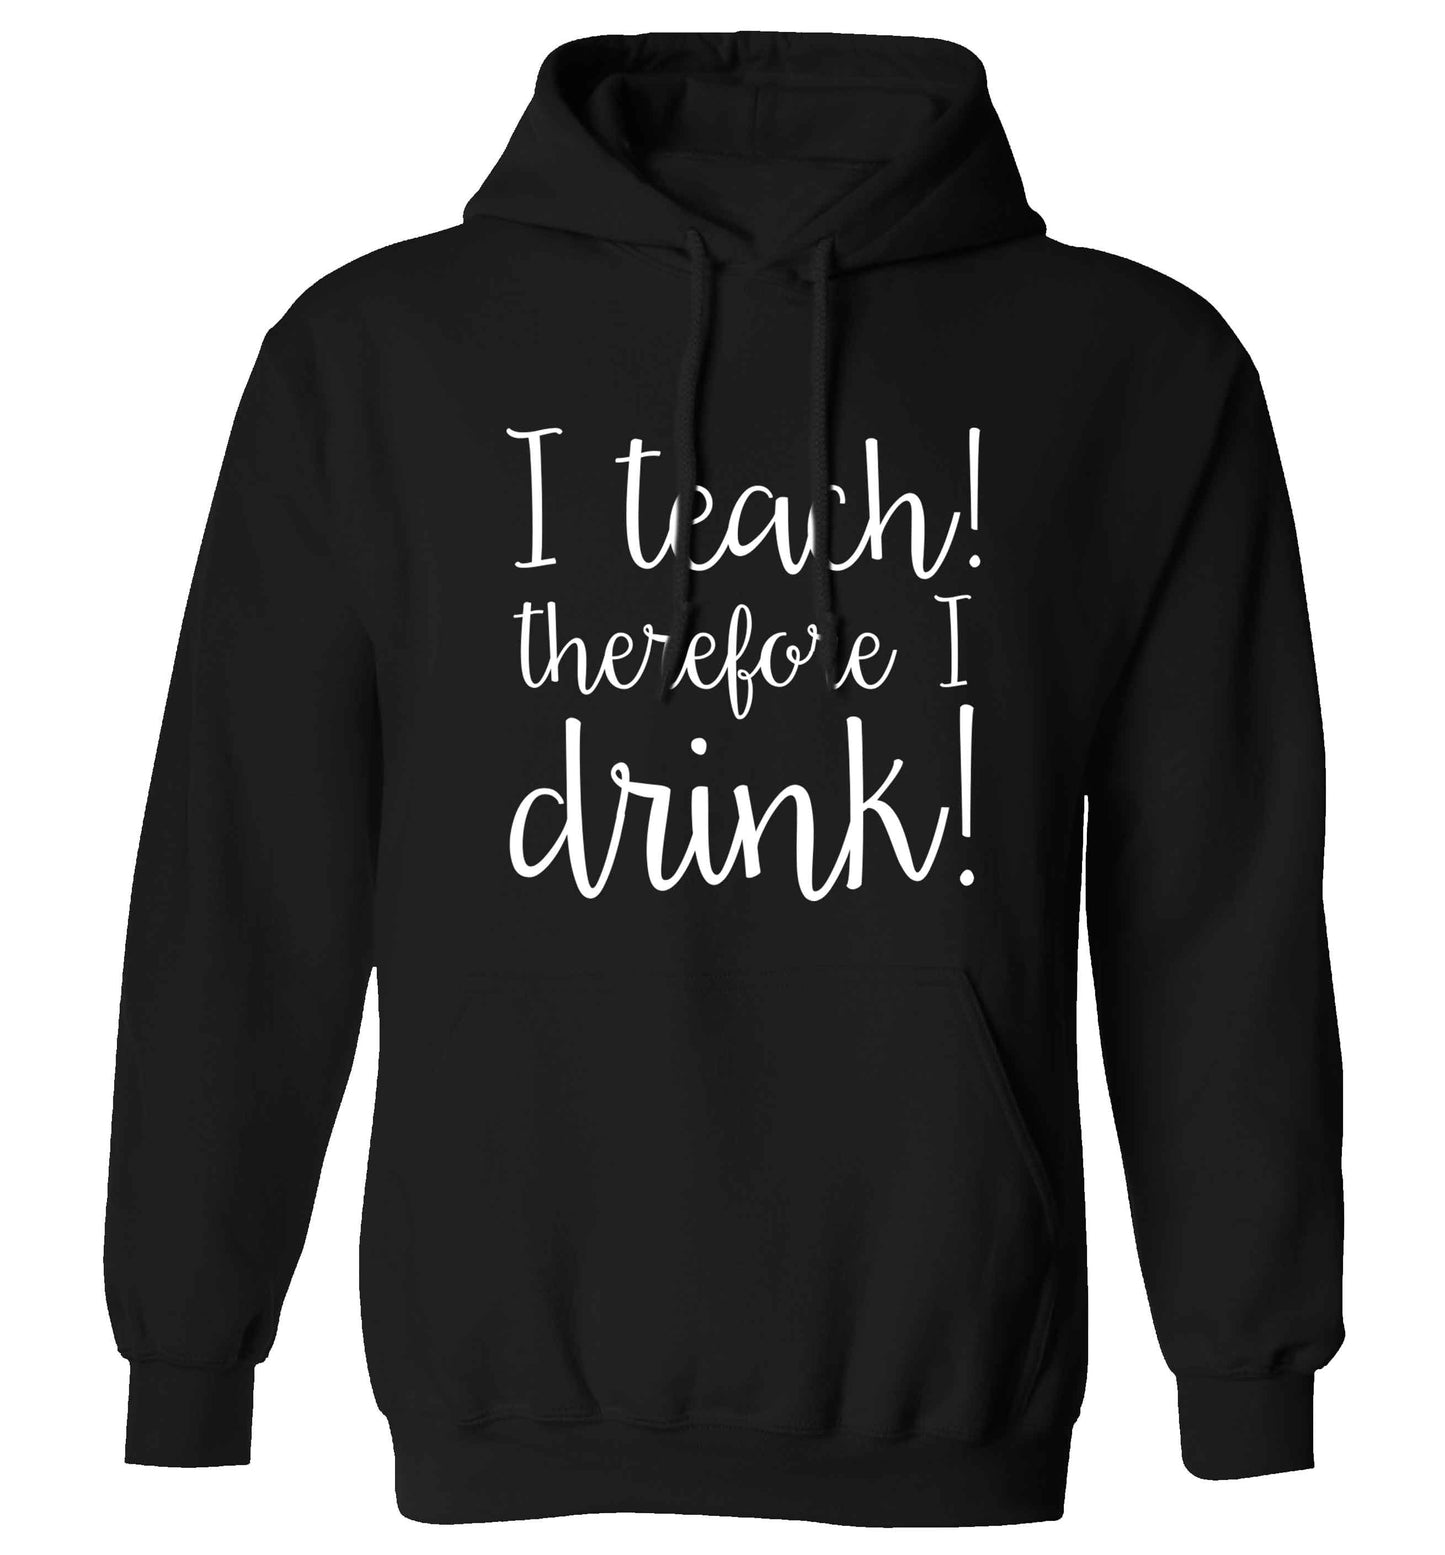 I teach therefore I drink adults unisex black hoodie 2XL